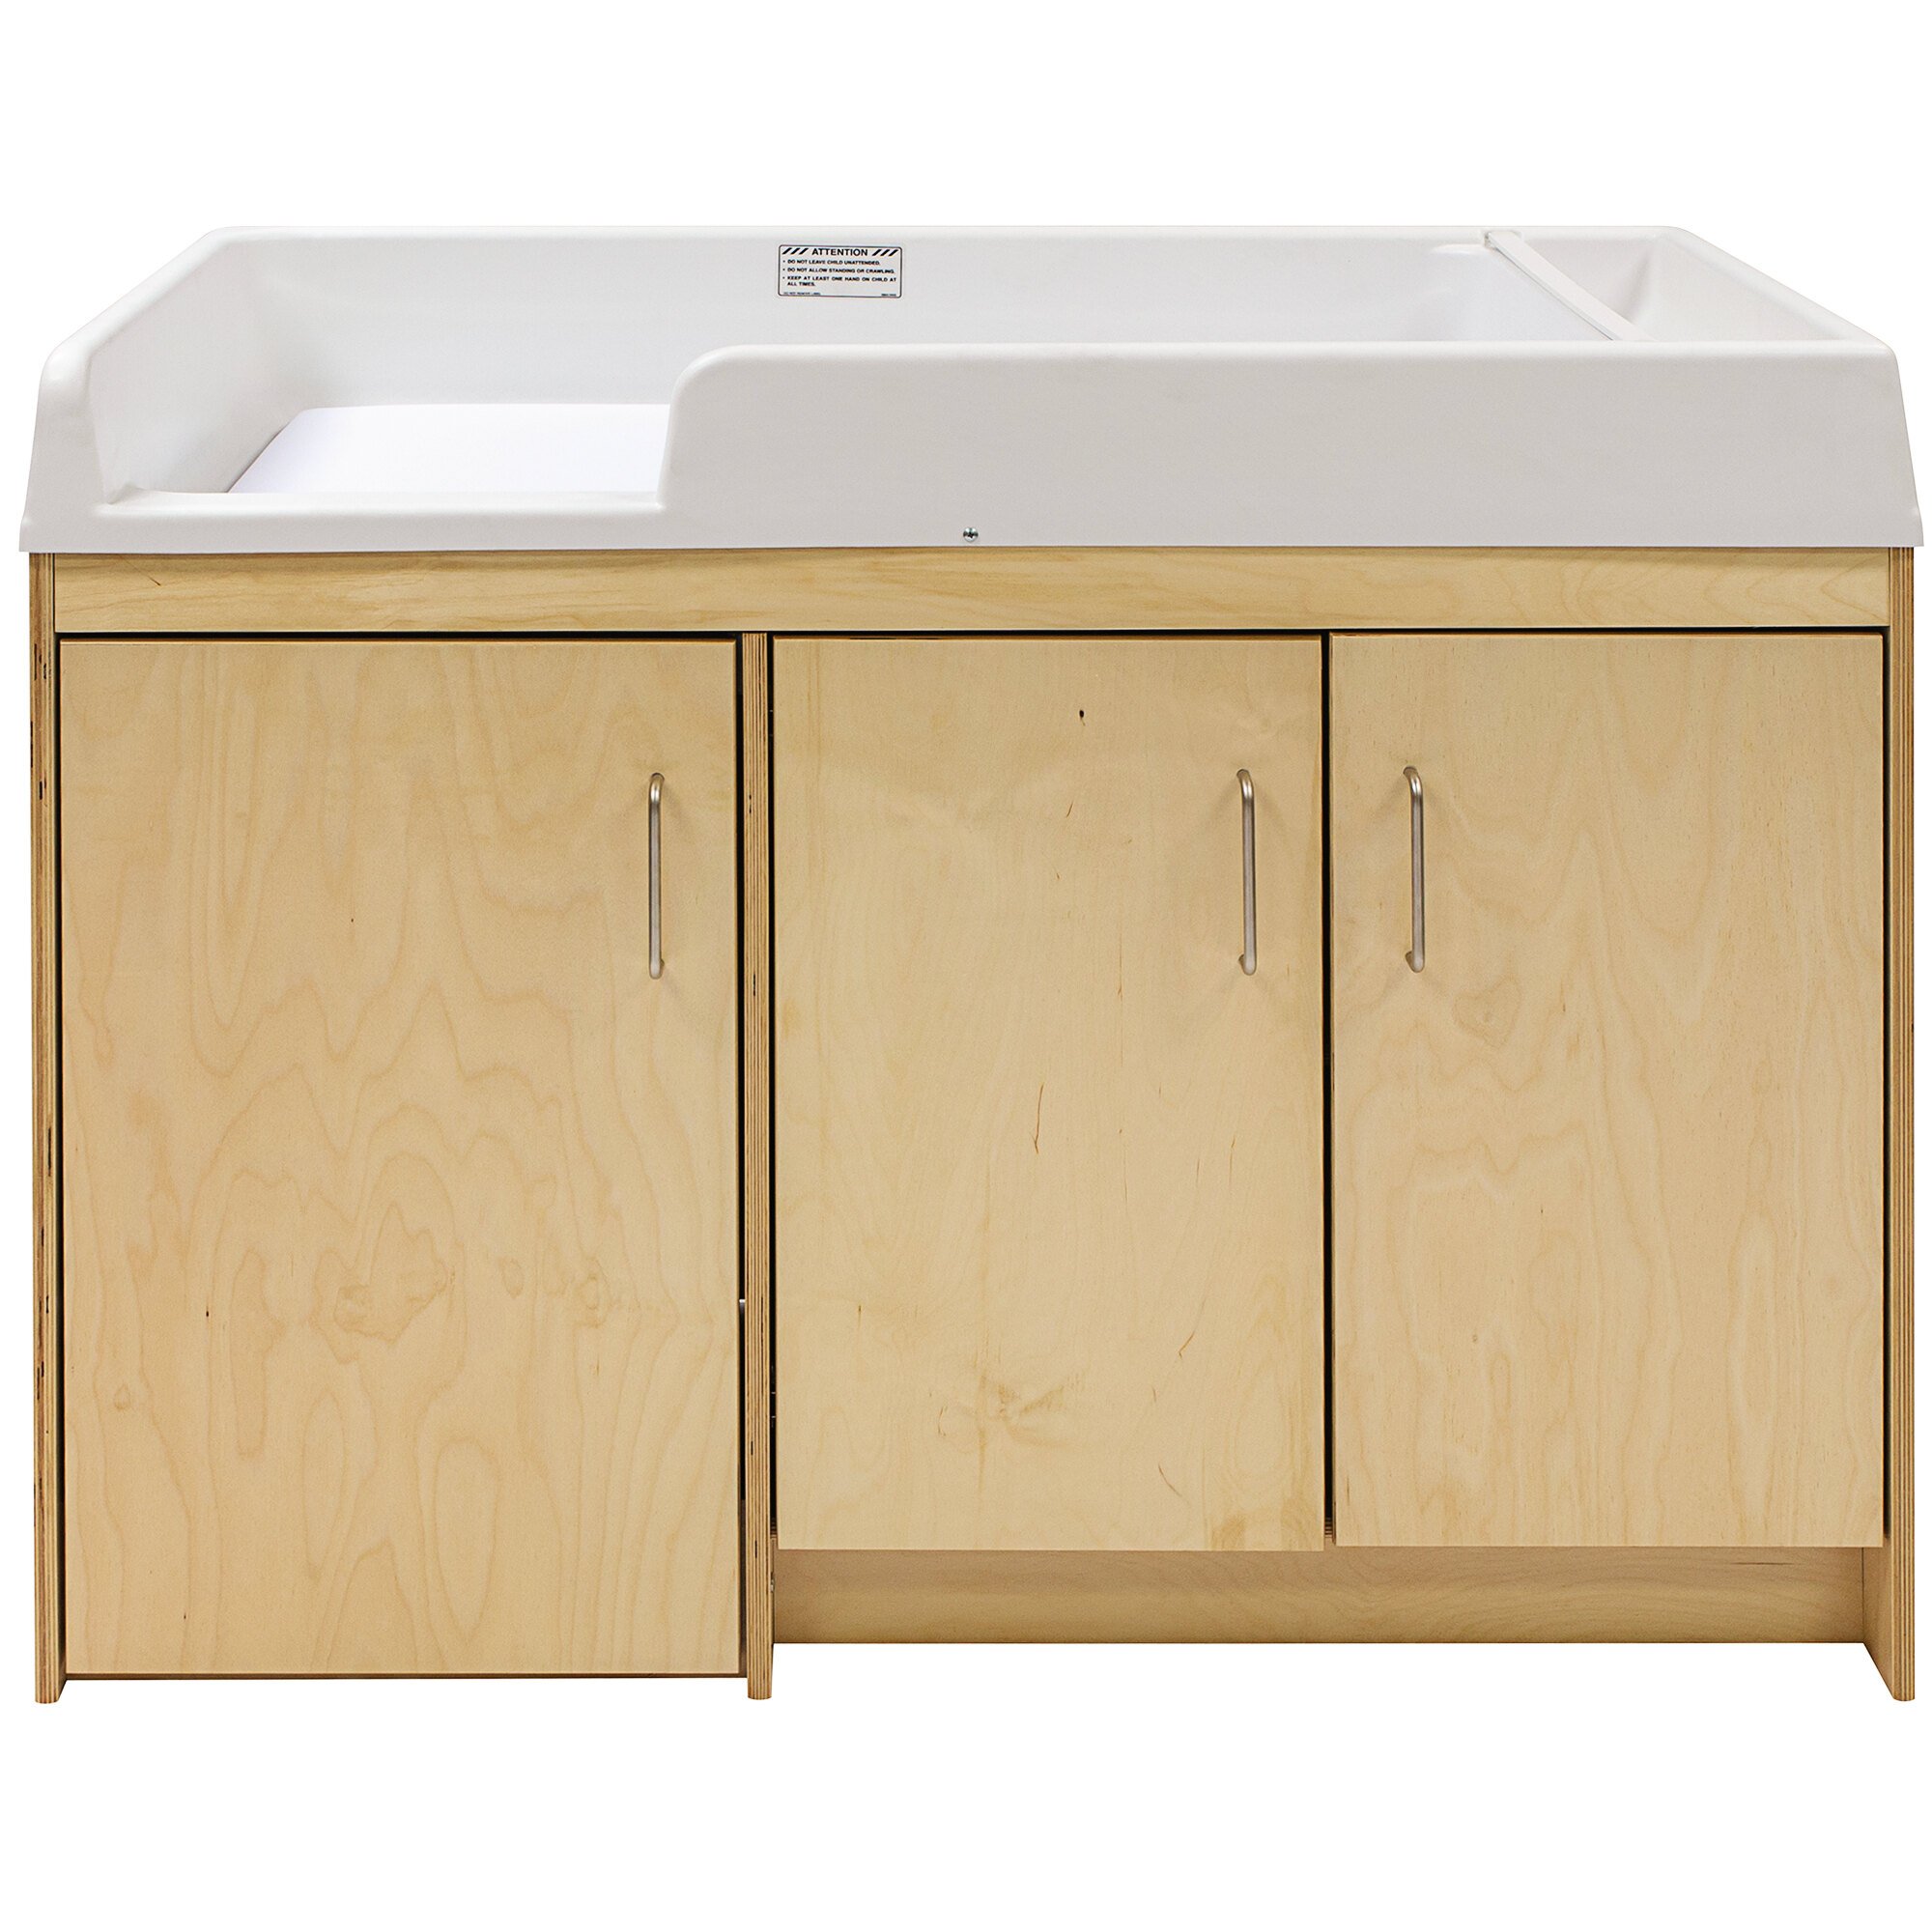 Tot Mate TM4530A.SBBBB Natural Birch Plywood Infant Changing Table - 47 ...